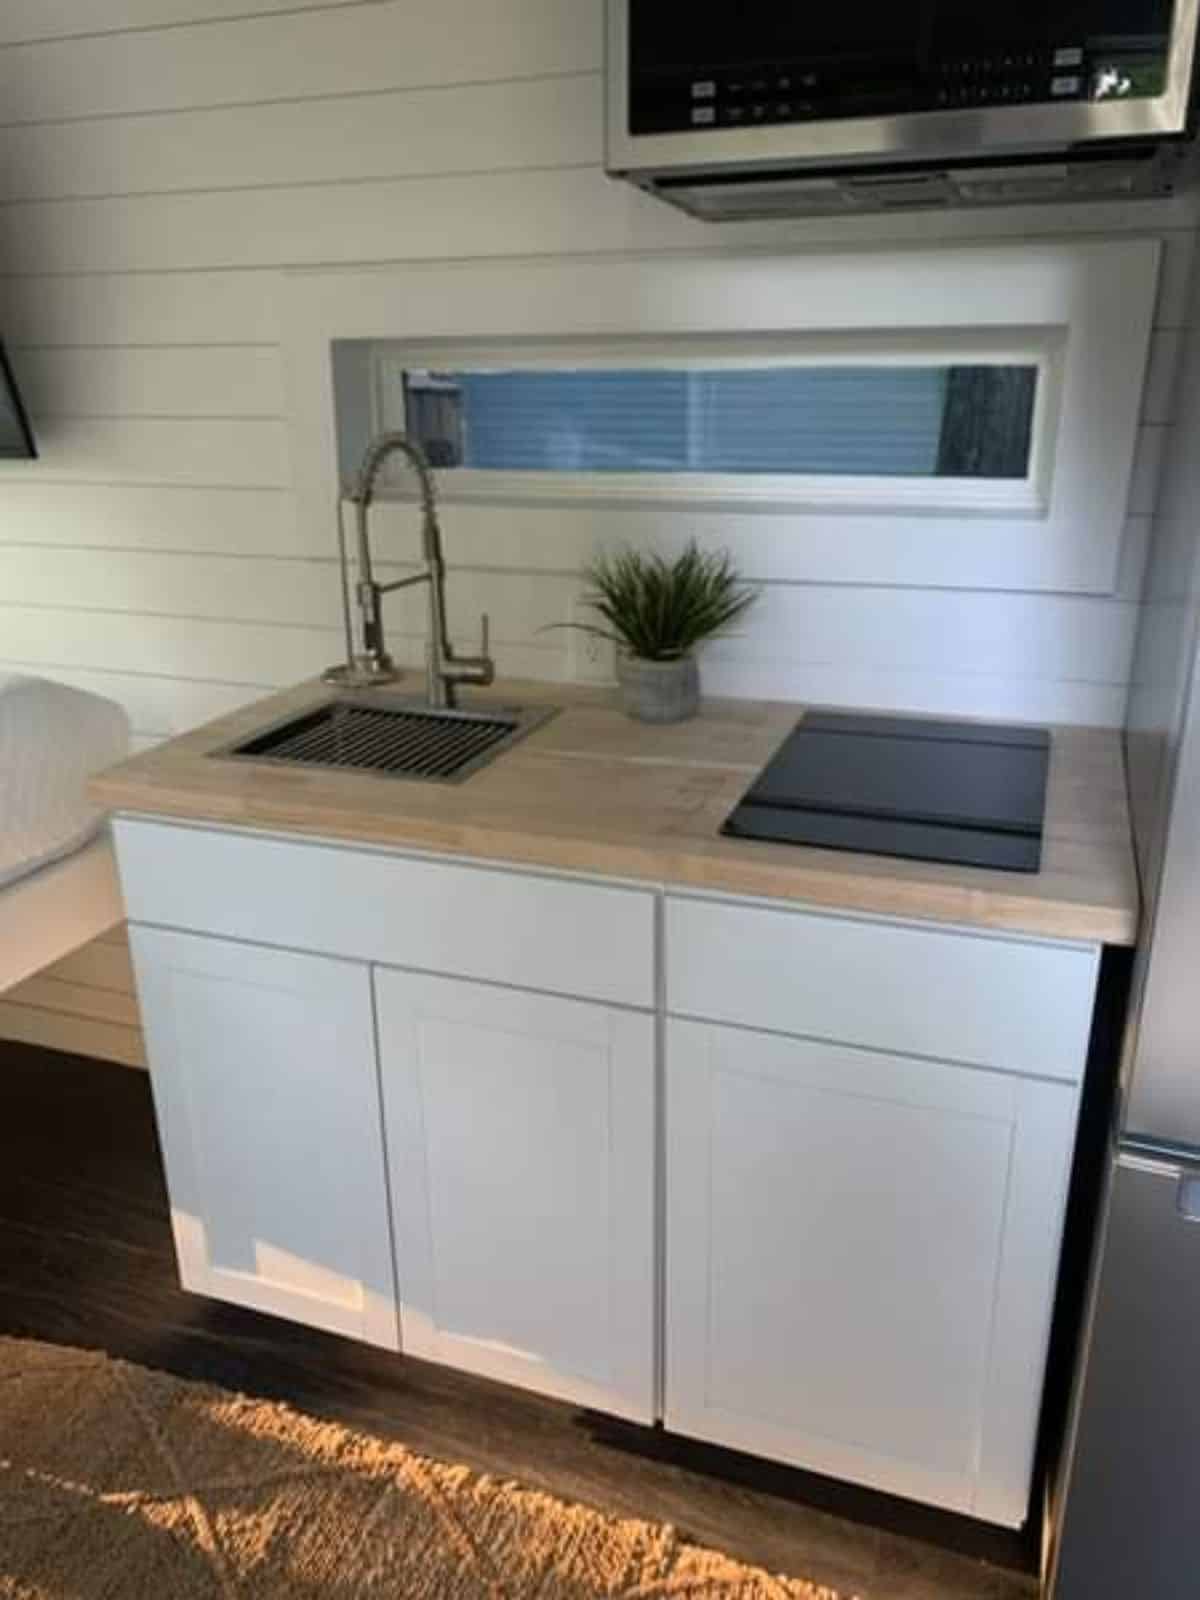 Small but neat kitchen area of Container Tiny House with double door refrigerator